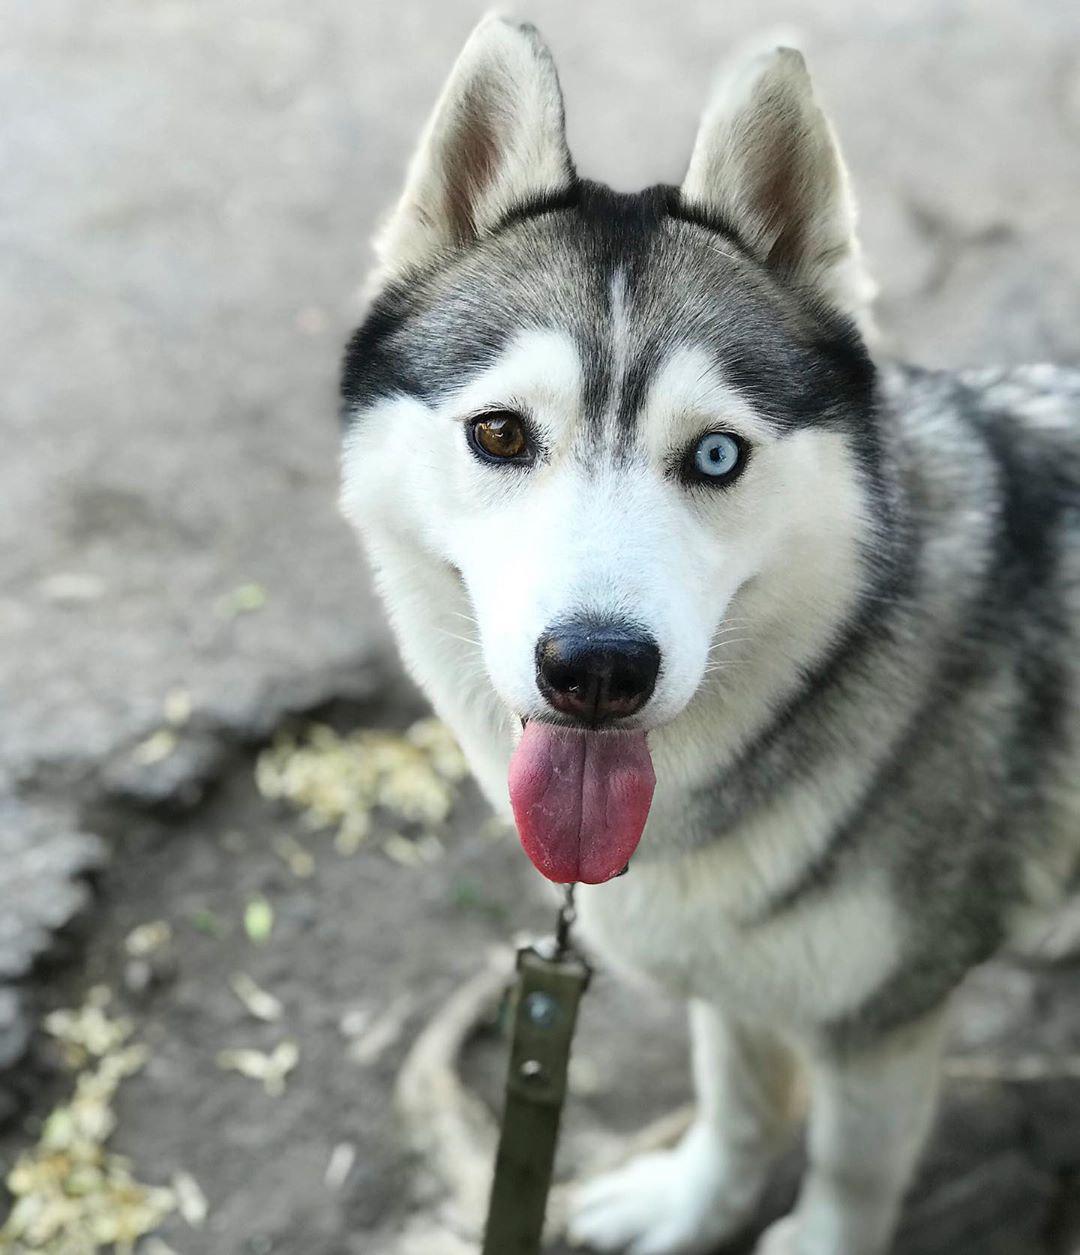 A Siberian Husky standing on the pavement with its tongue out